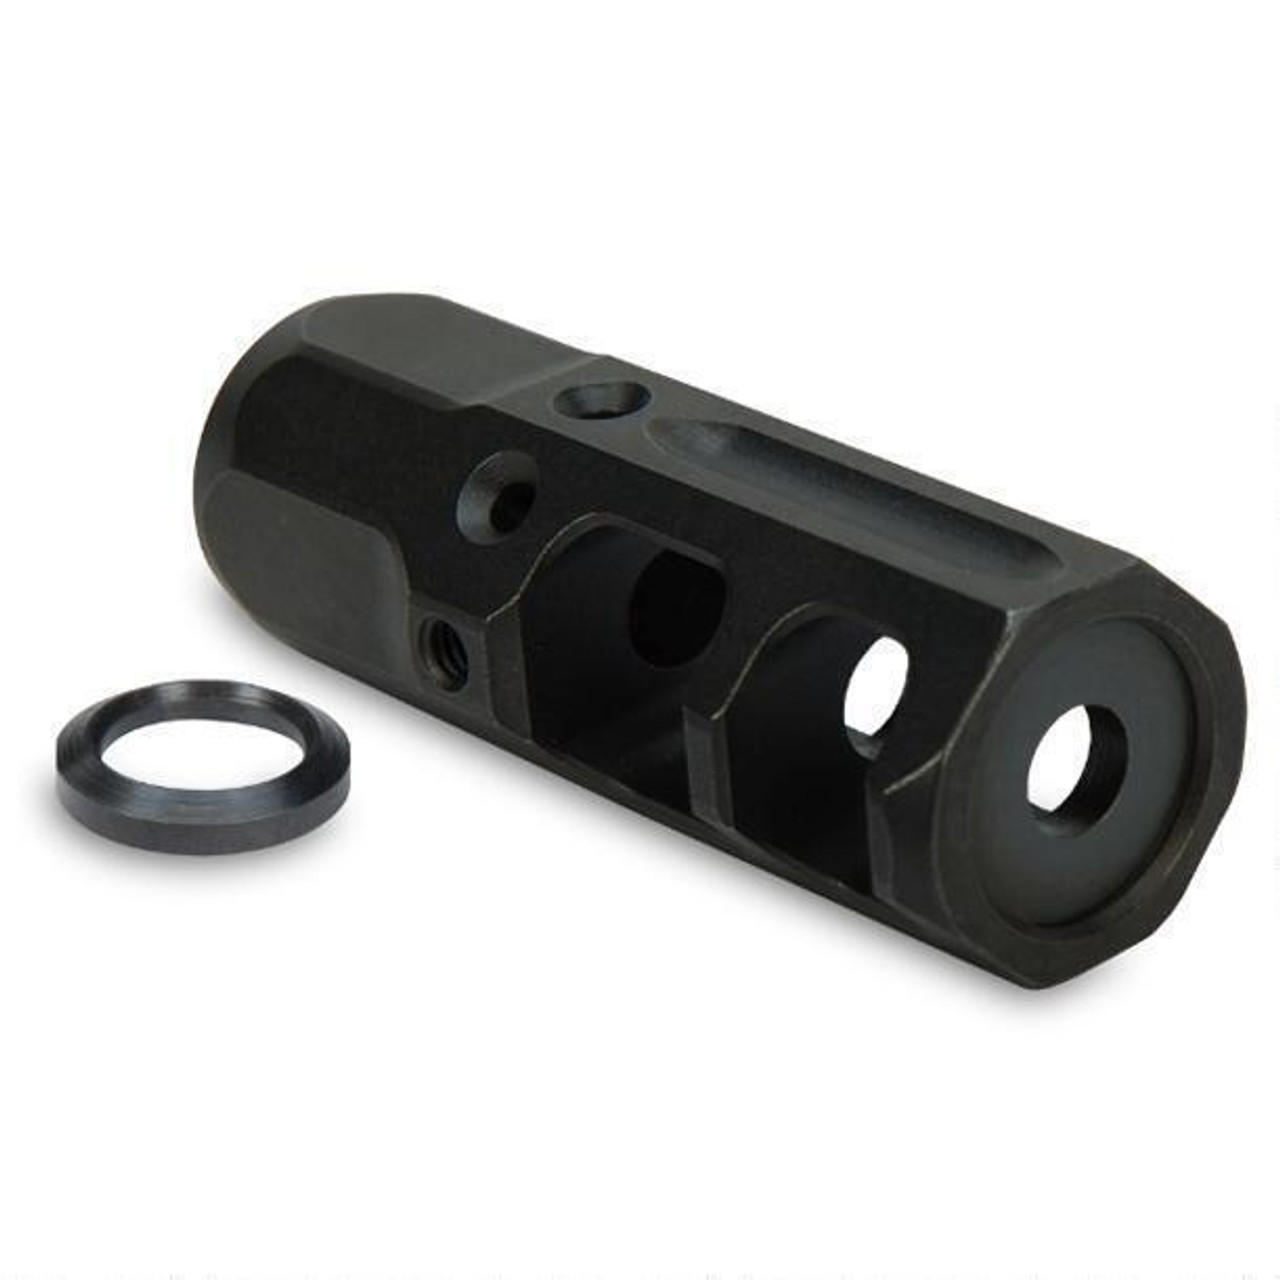 Nordic Components AR-15 NCT3 Compensator 9mm Luger Threaded 1/2"x28 Nitride Finish Matte Black